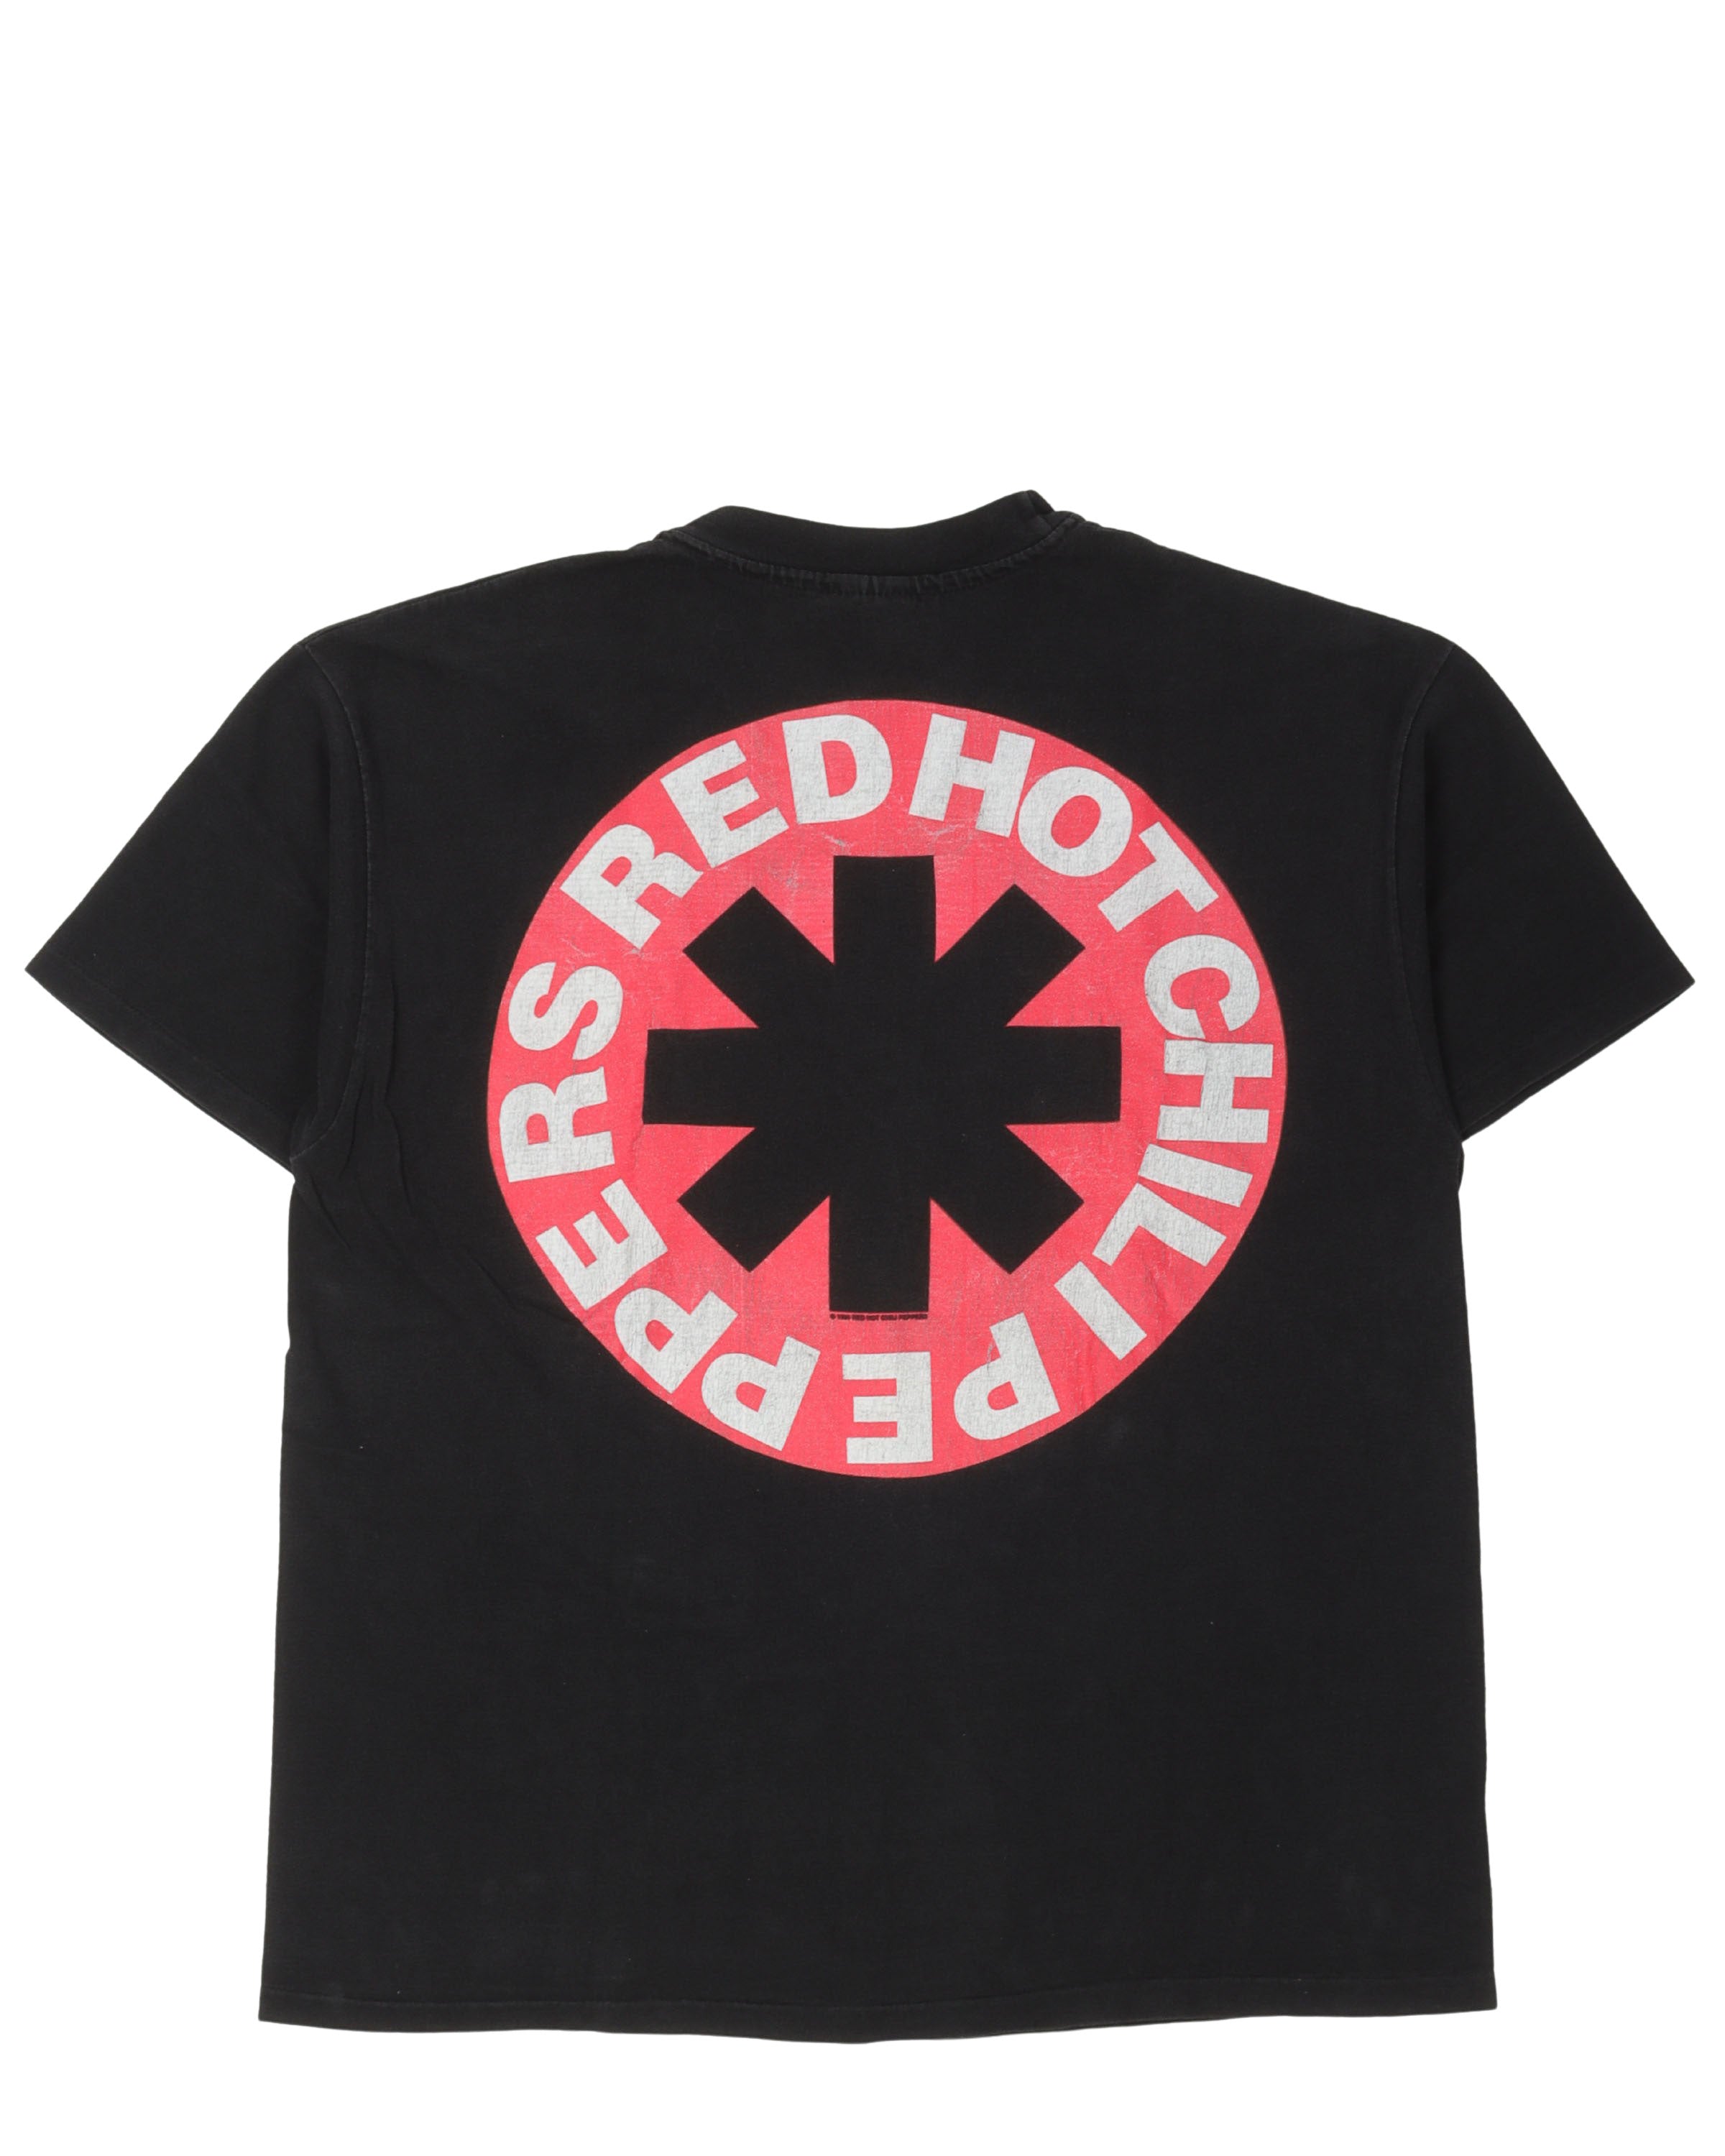 Red Hot Chili Peppers T-Shirt (1991)